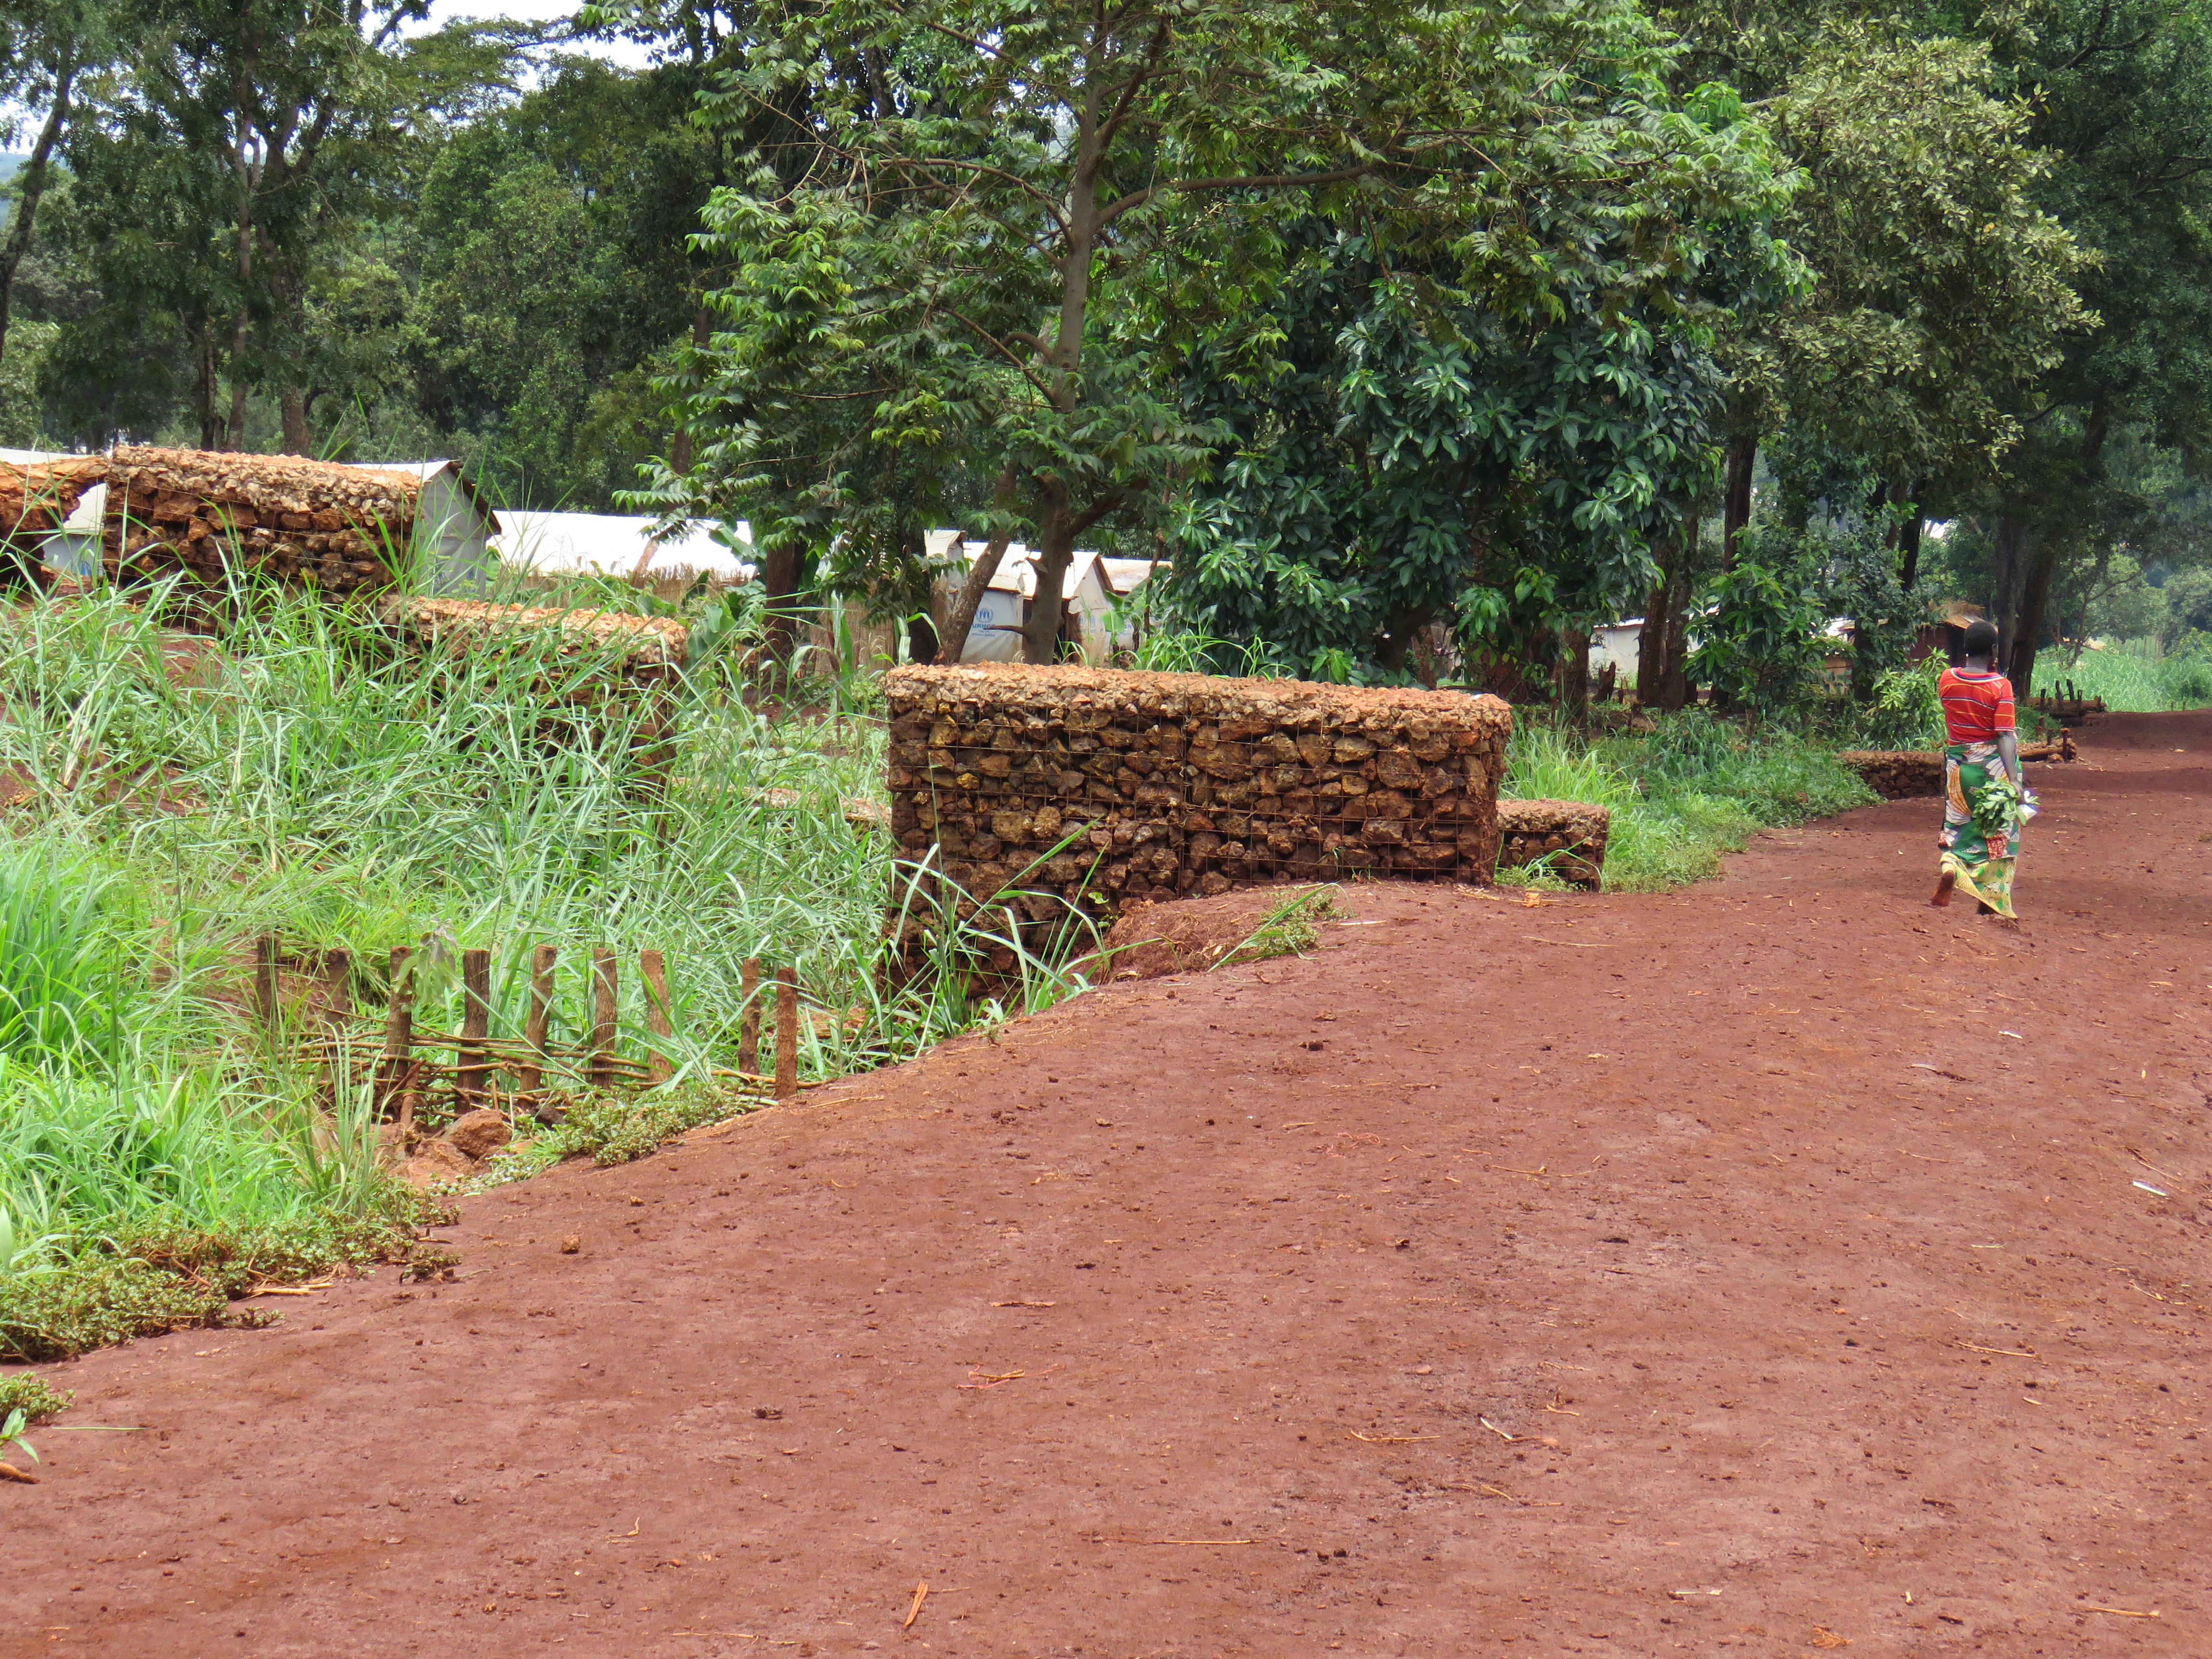 Gabions constructed by REDESO as a soil conservation intervention through rehabilitation of gullies at Mtendeli camp in Kakonko District